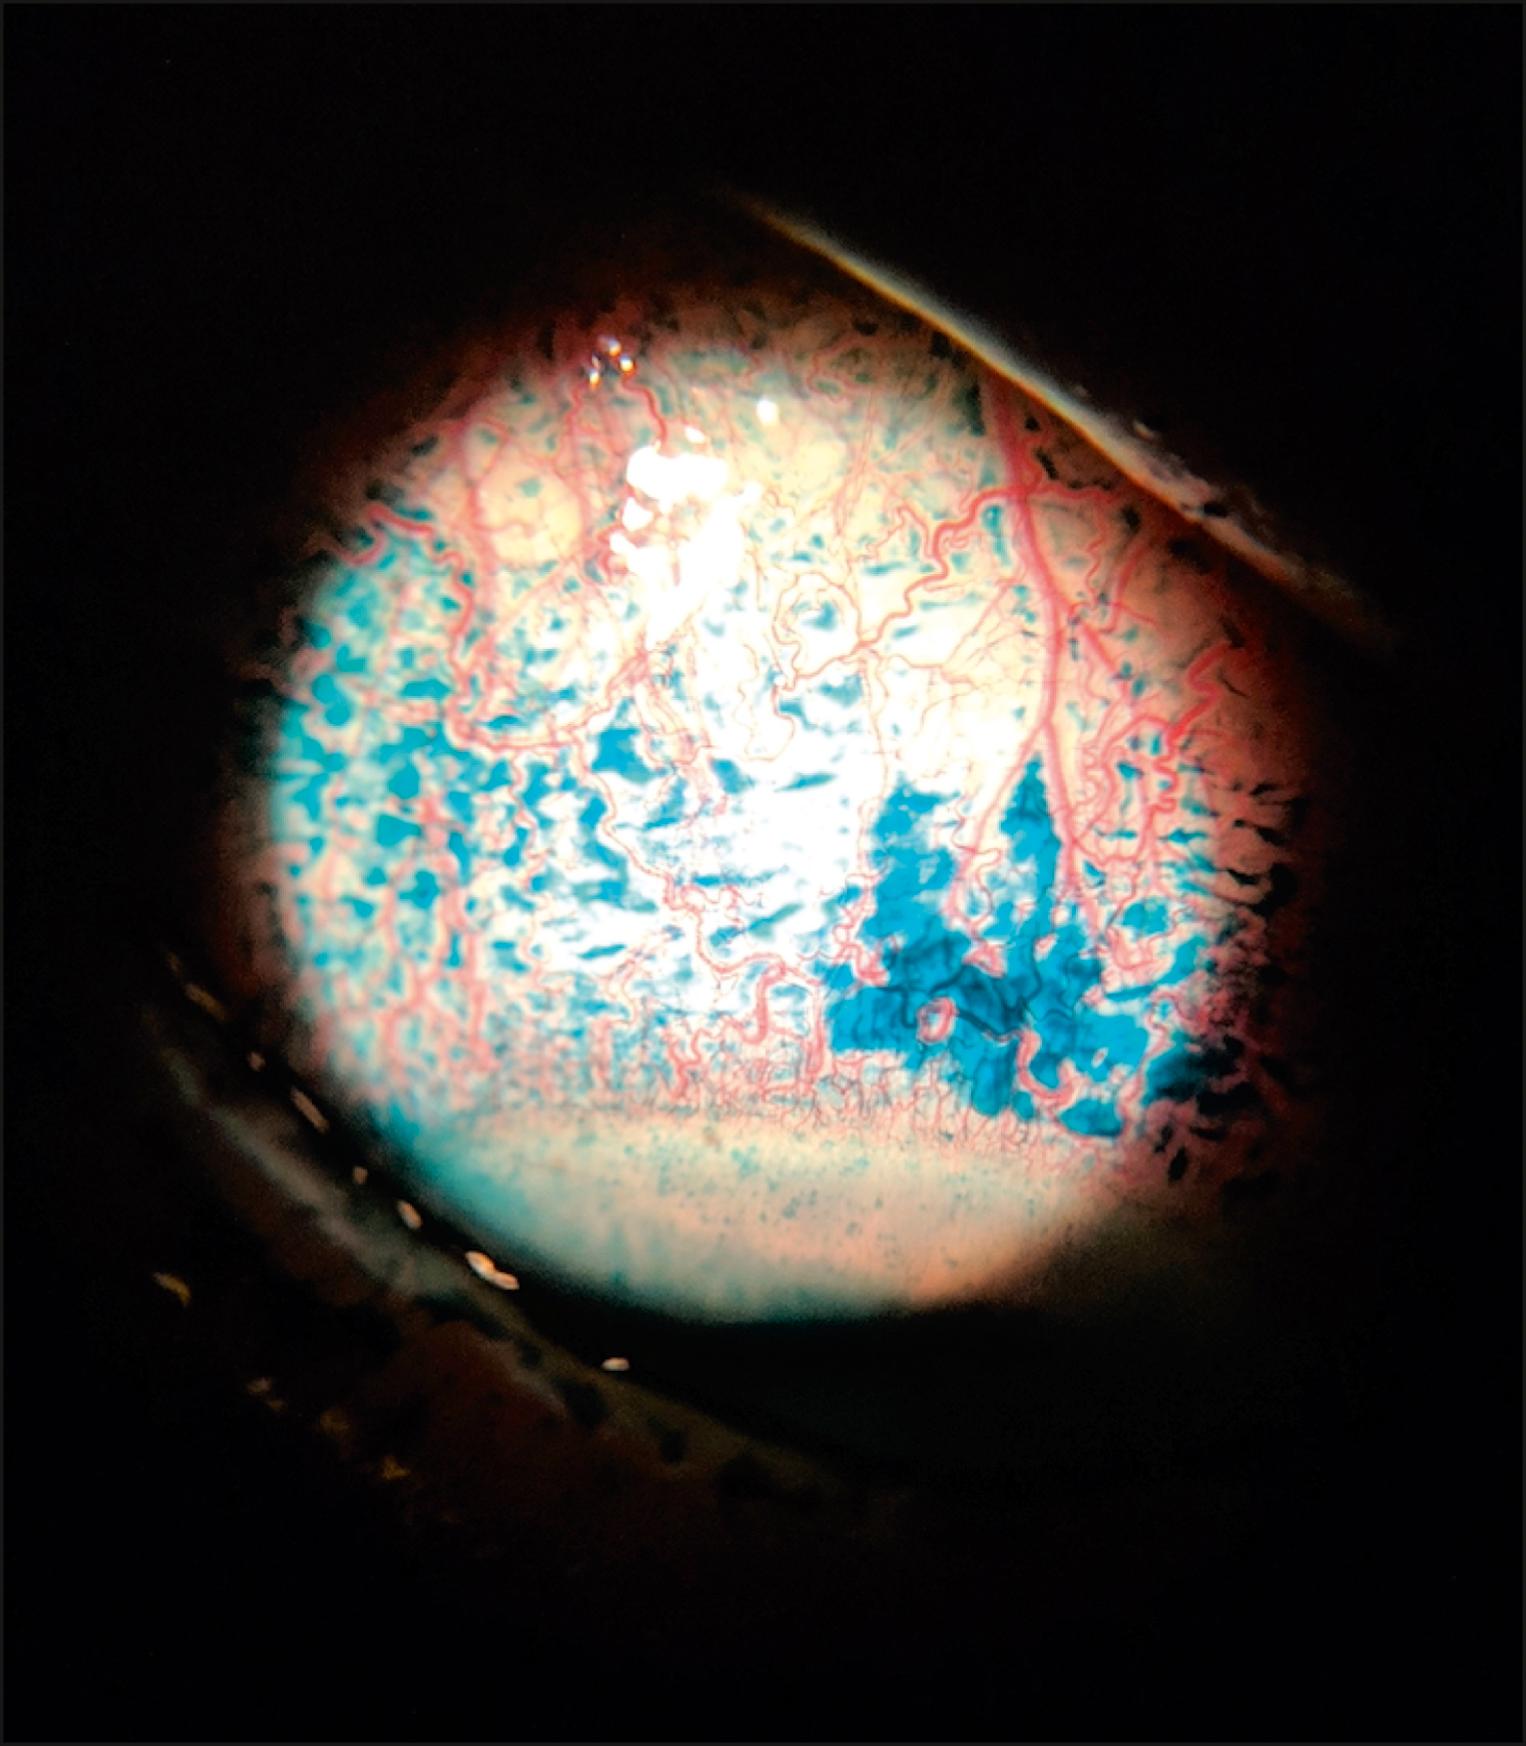 Fig. 48.2, Upper bulbar conjunctiva in a patient with superior limbic keratoconjunctivitis is irritated and injected. Lissamine green staining reveals epithelial defects on this area.